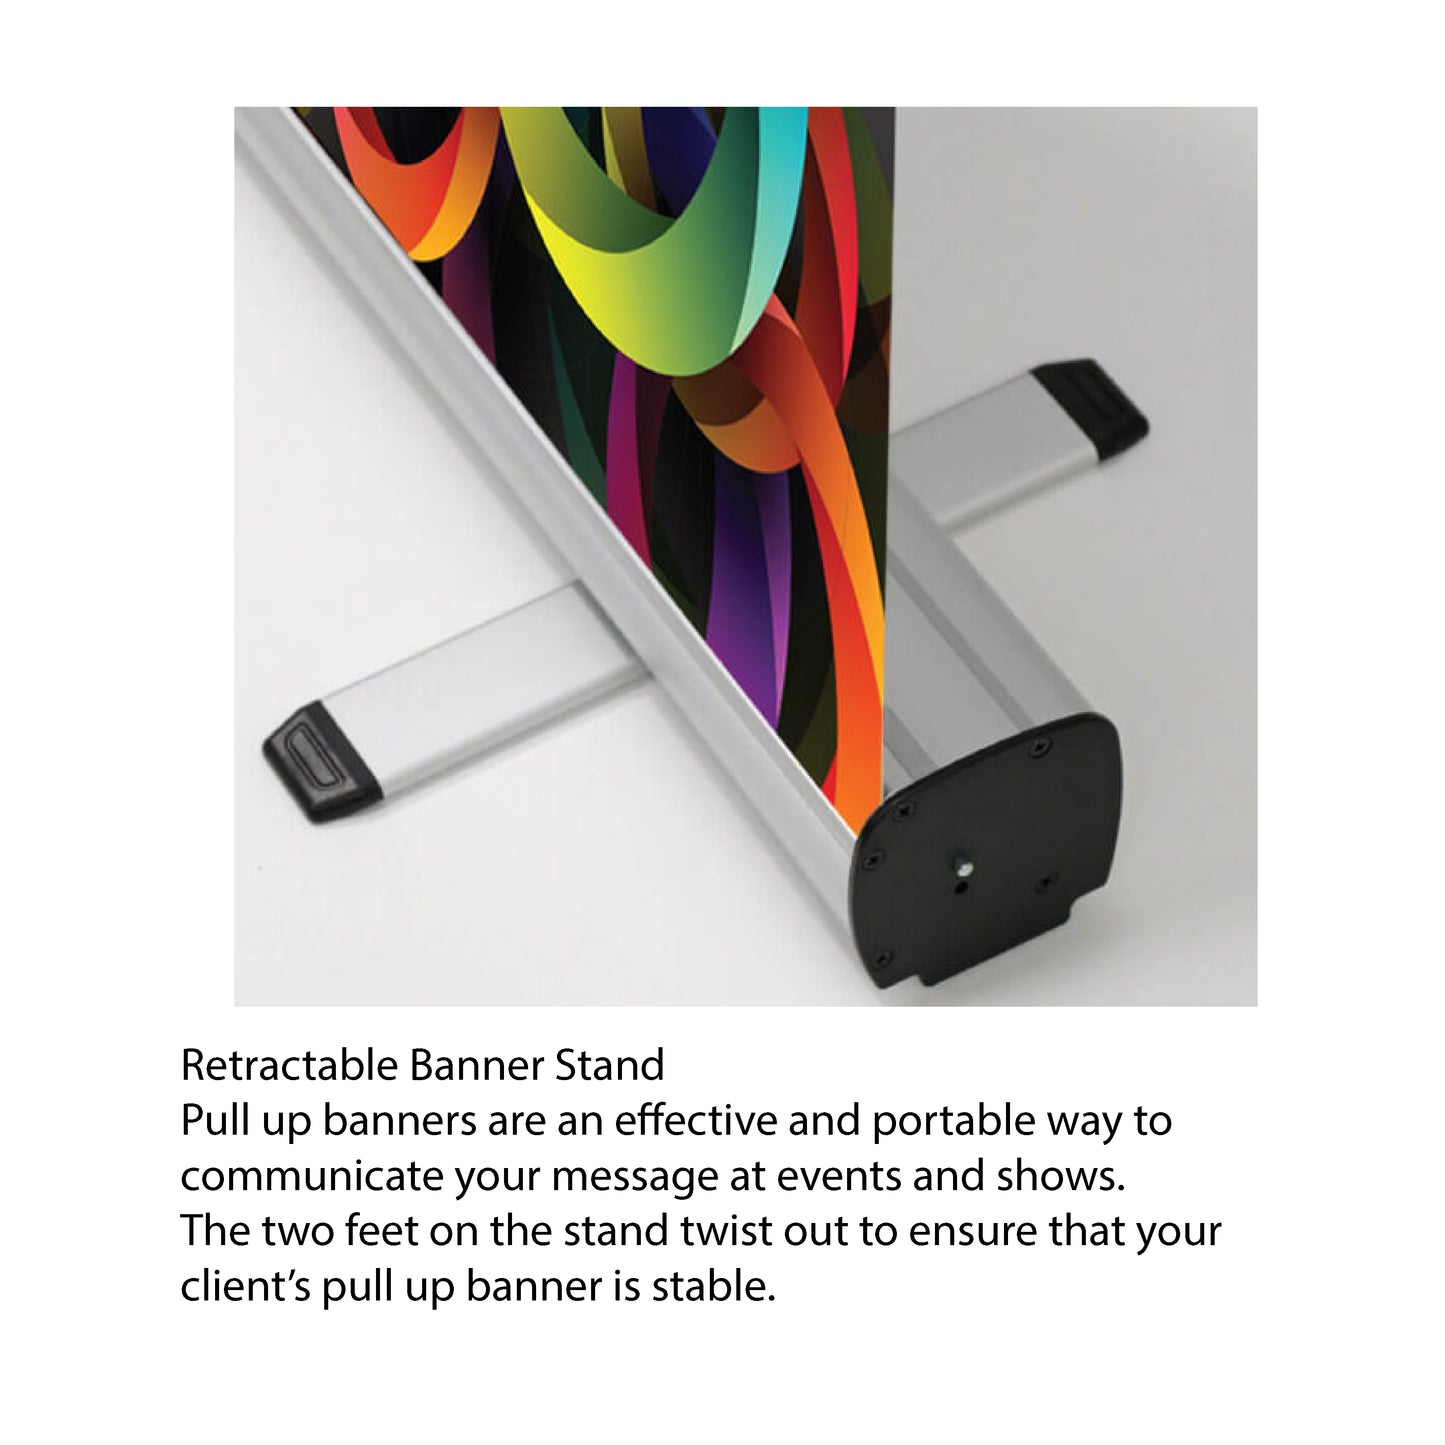 Custom Standard Pull Up Banners, Custom Banner, Pull Up Banners